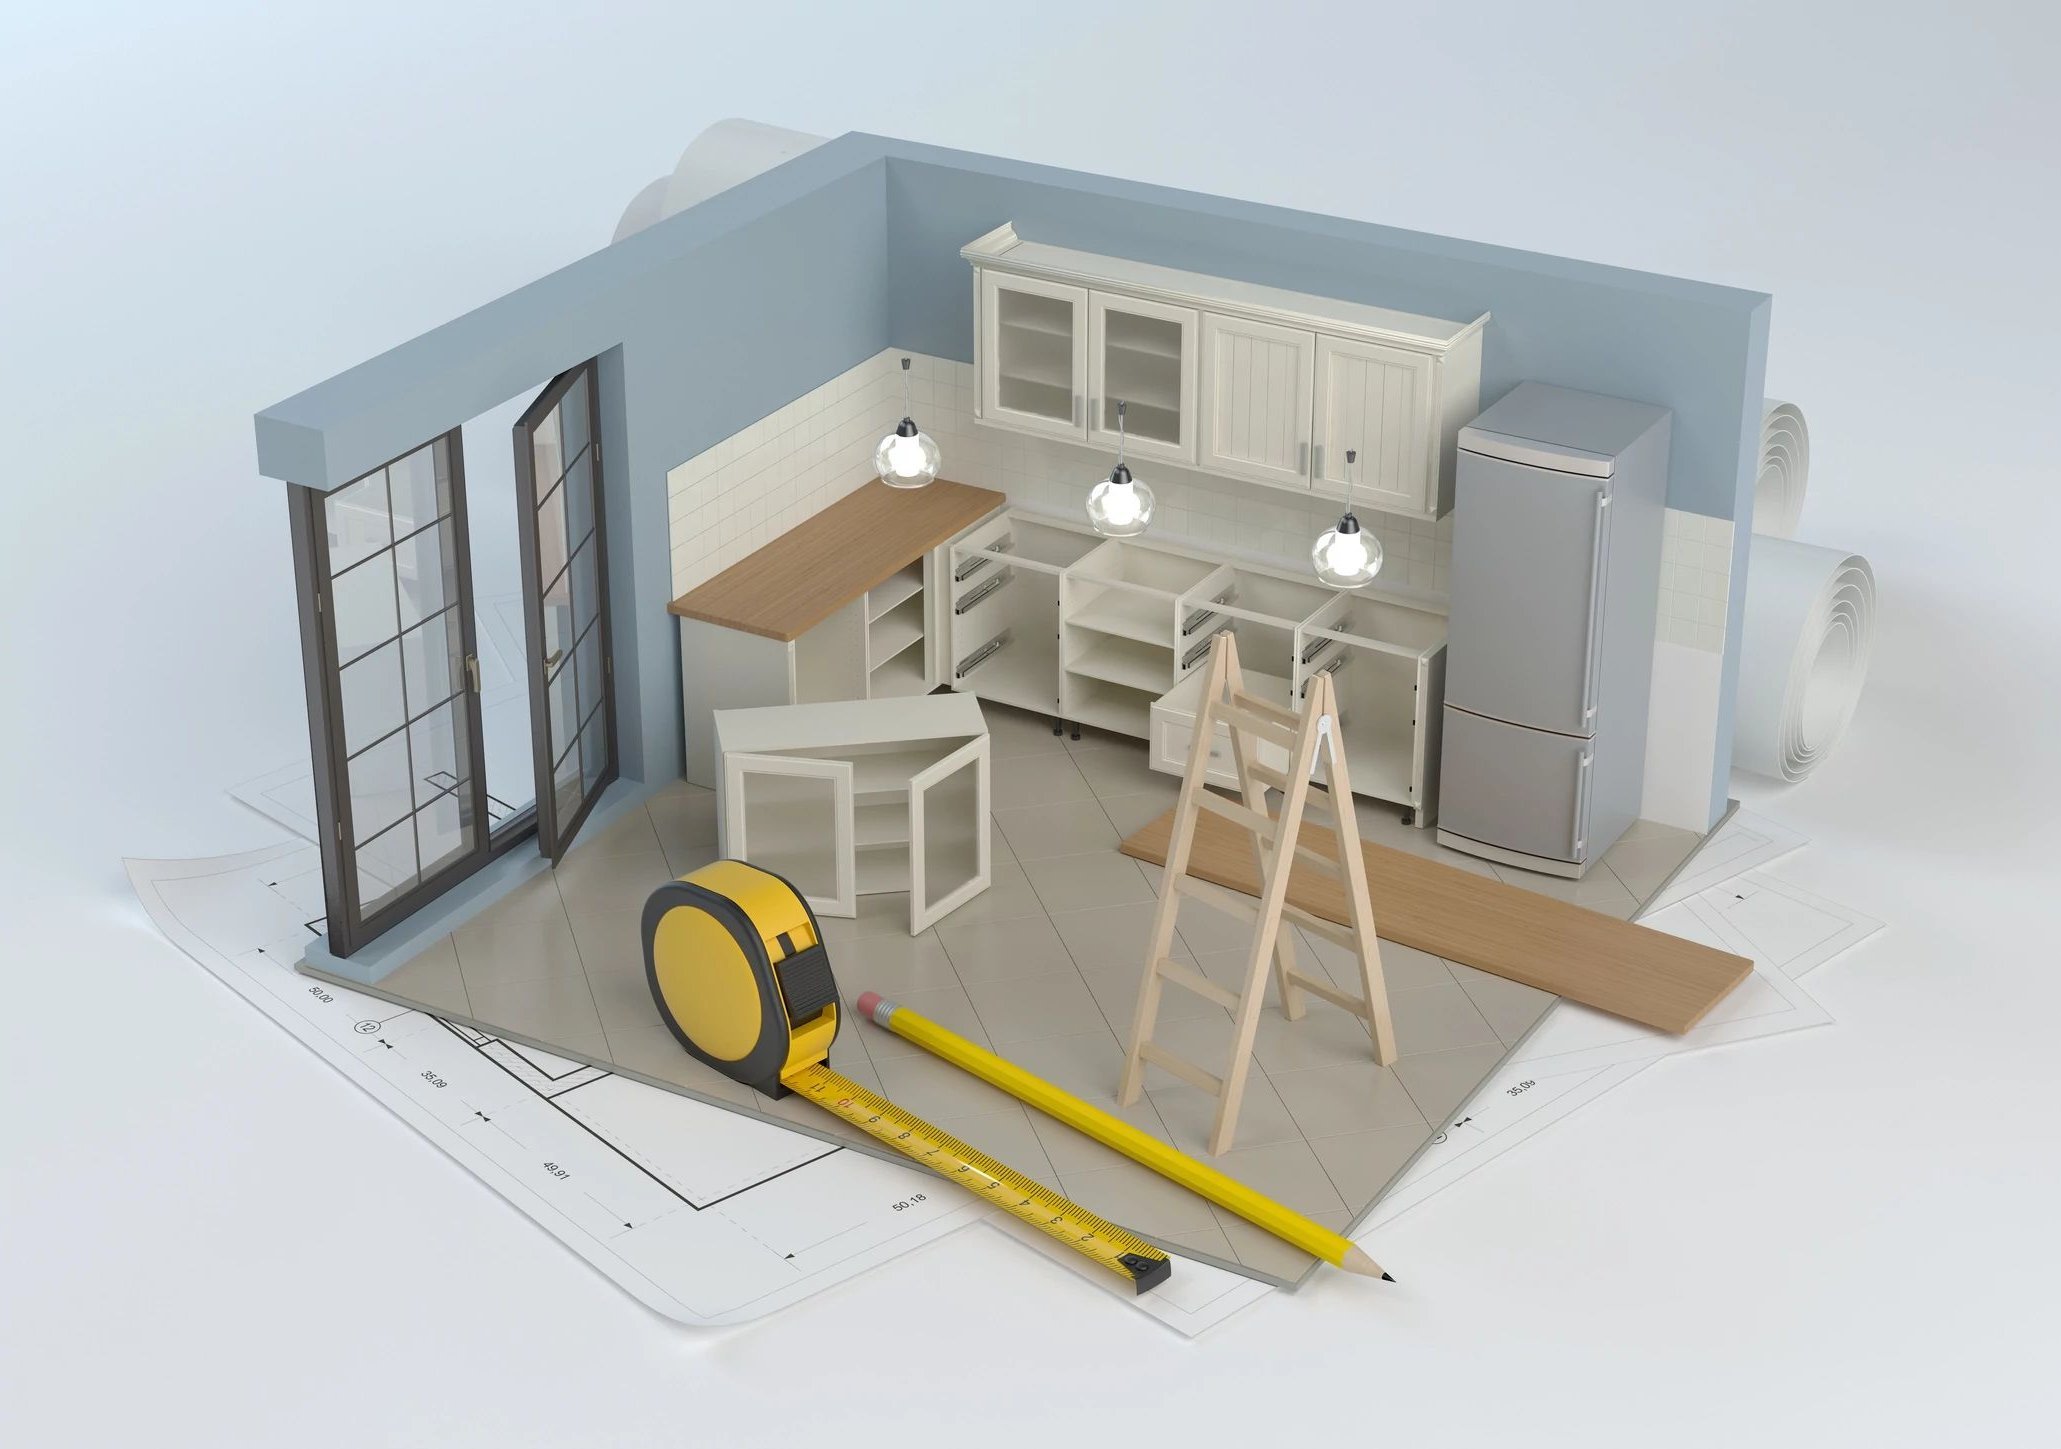 Diorama model of kitchen under construction - Classic Flooring and Design in FL